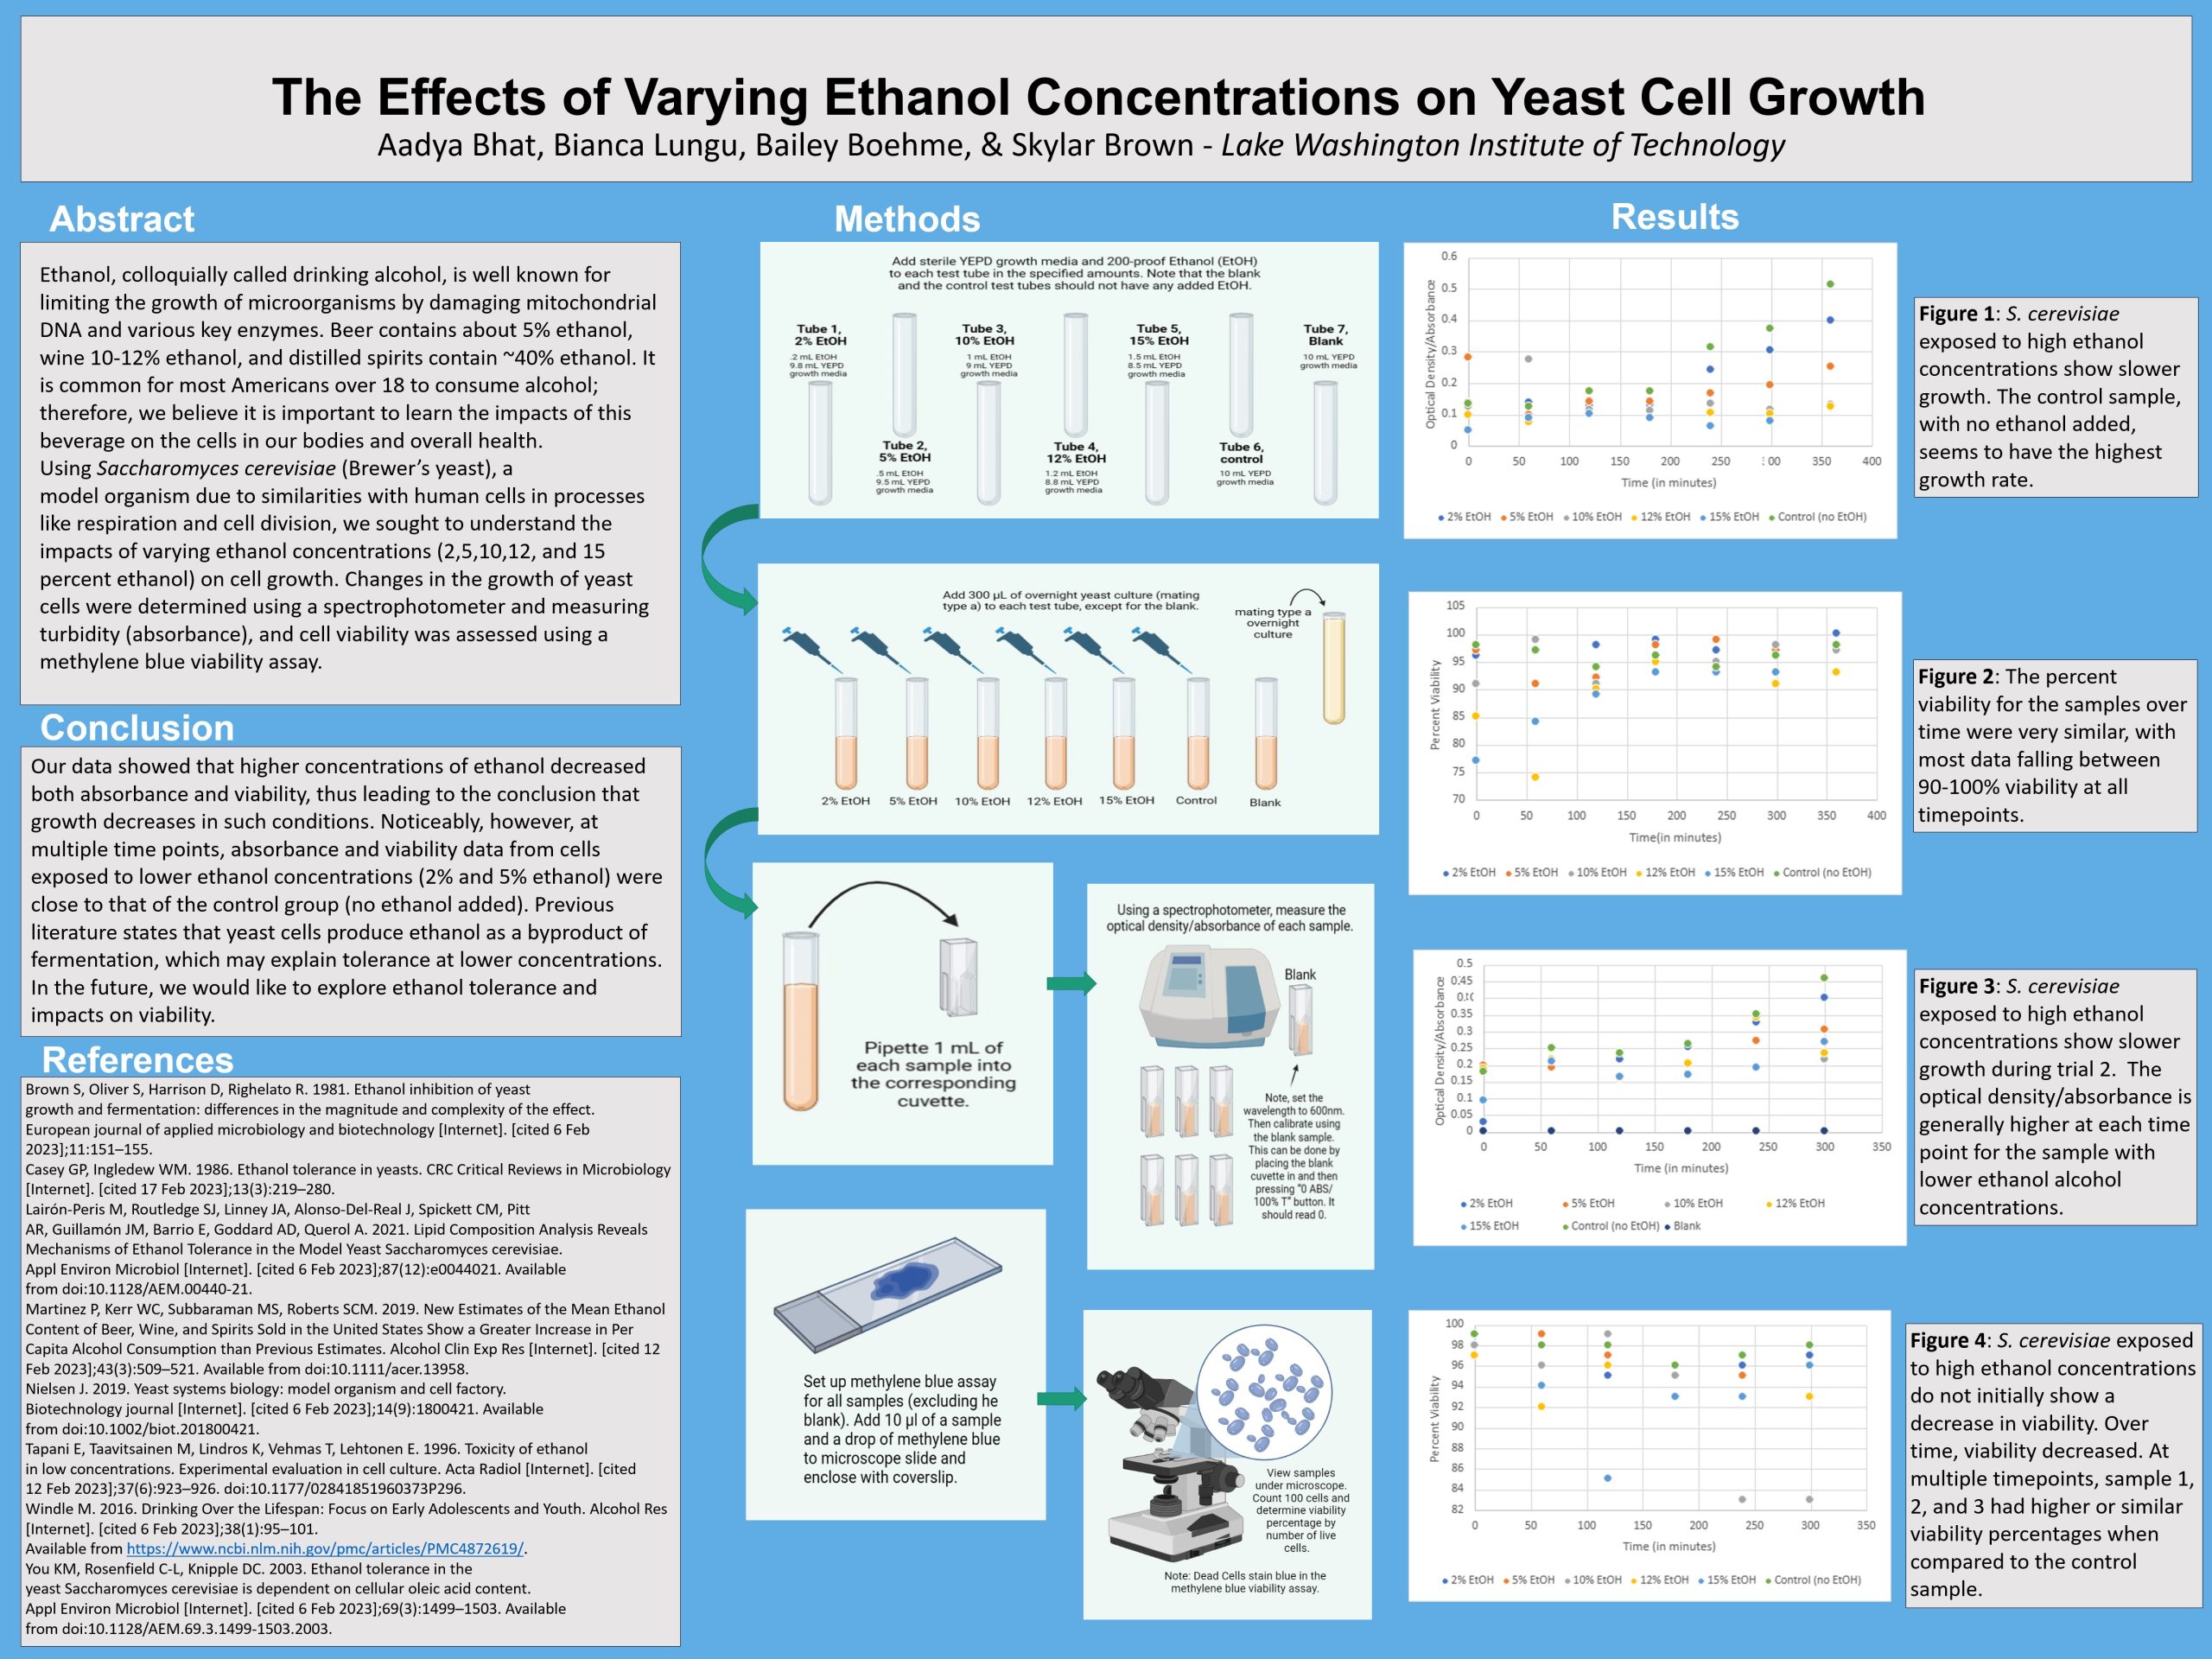 Research poster about ethanol concentration on yeast cell growth